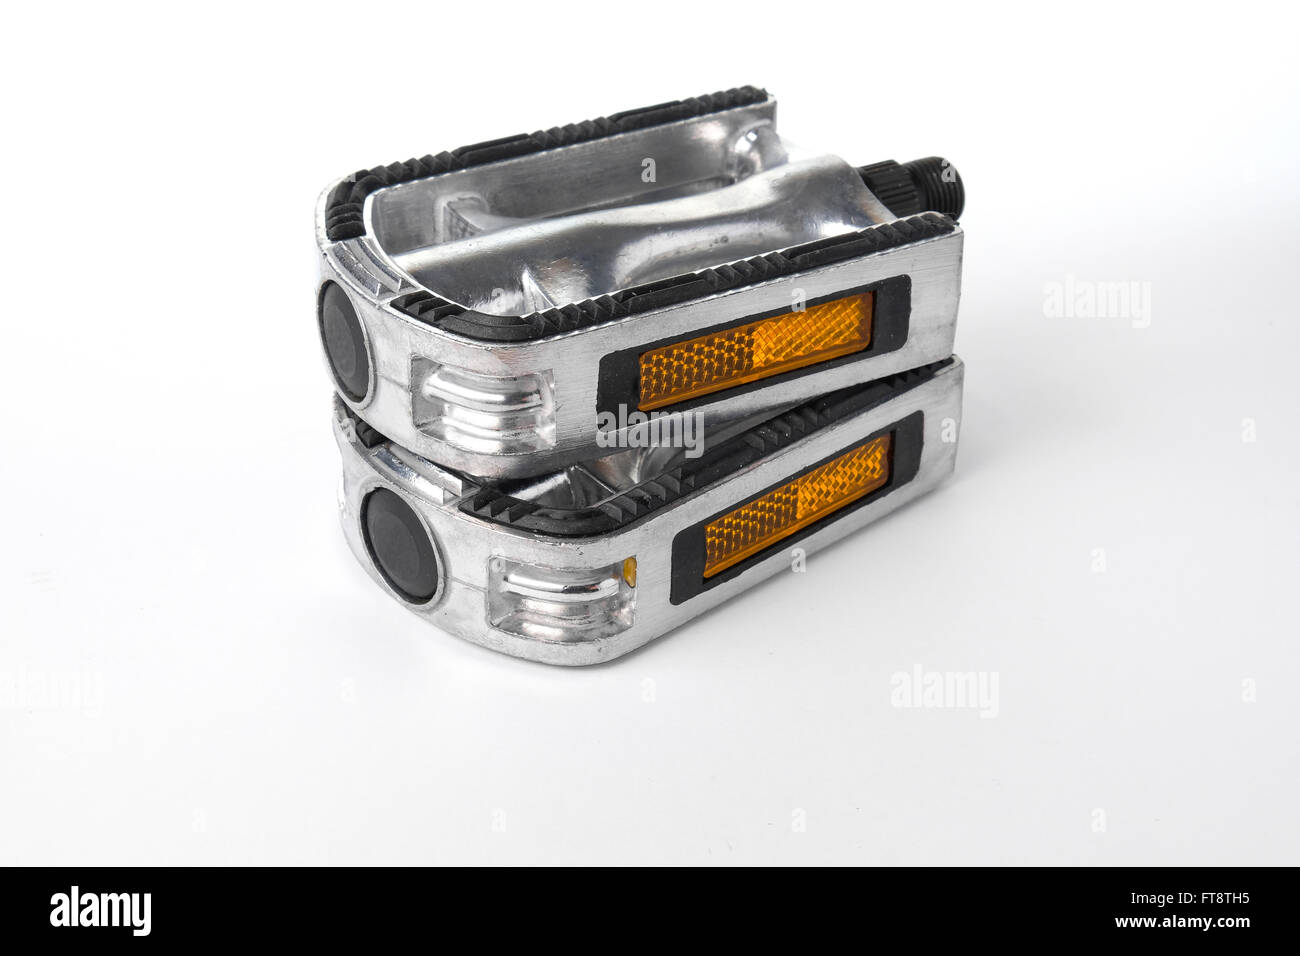 Two bicycle pedals of aluminum lying on top of each other Stock Photo